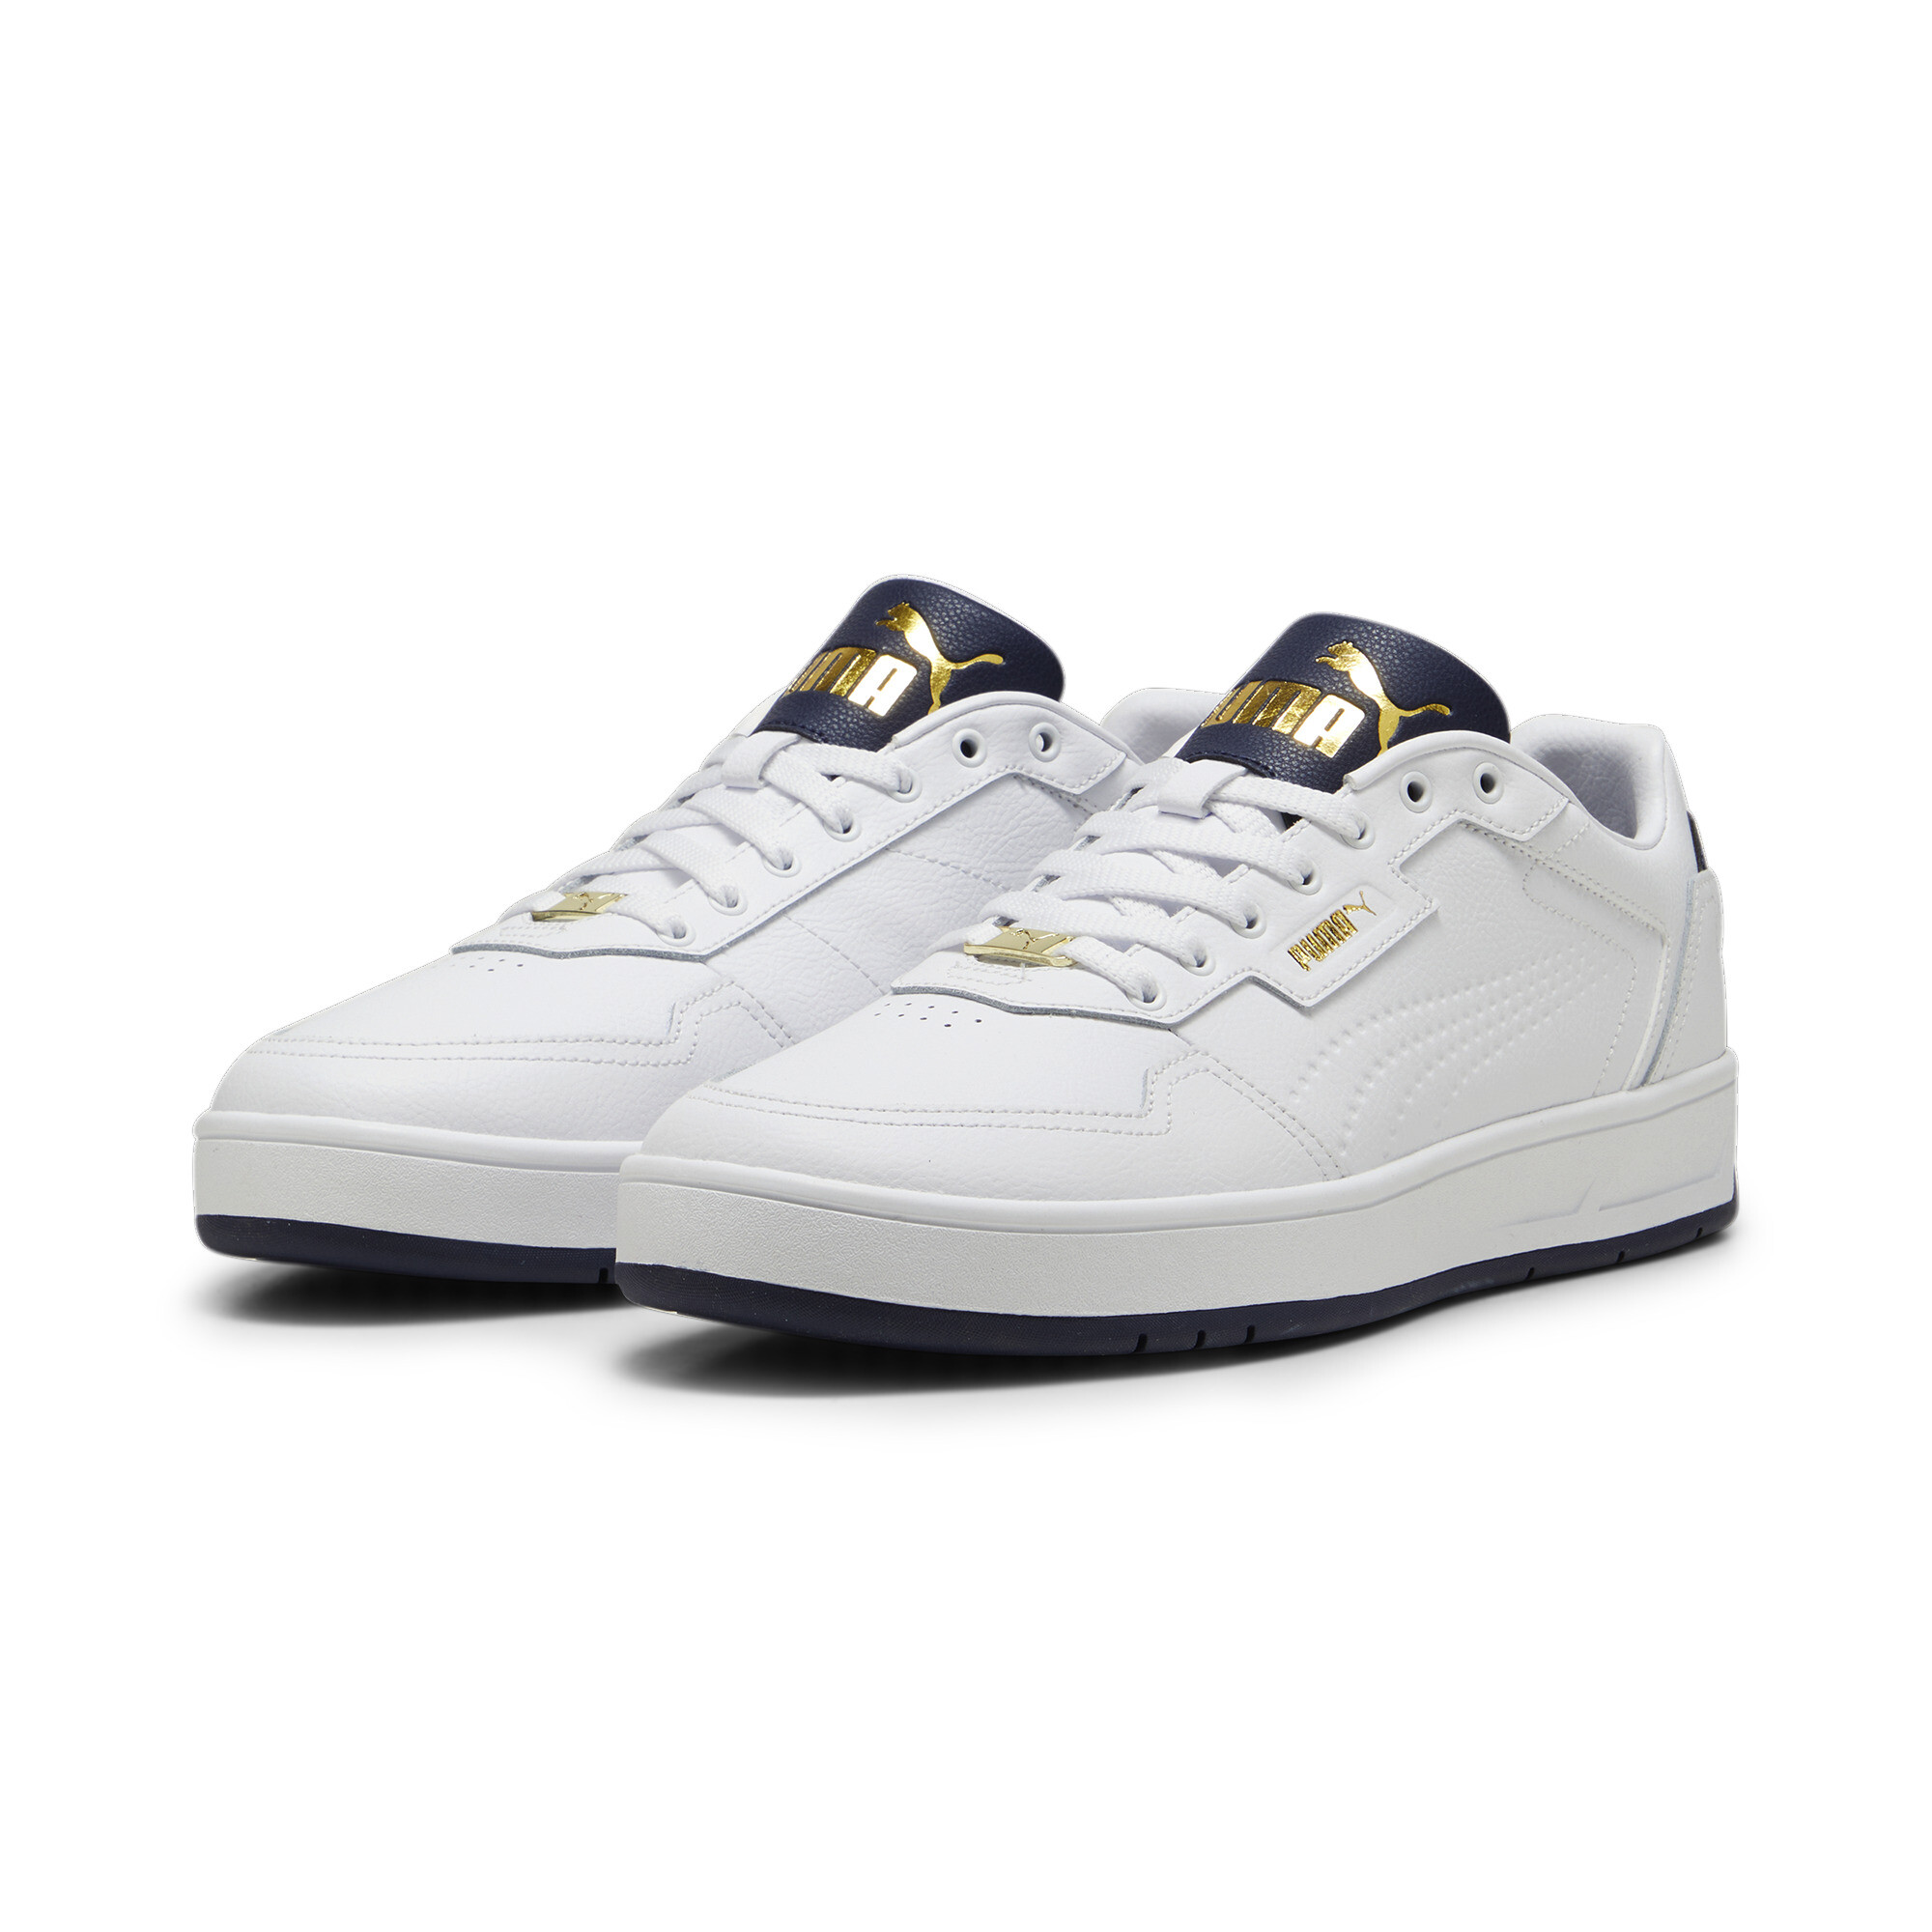 Puma Court Classic Lux Sneakers, White, Size 36, Shoes